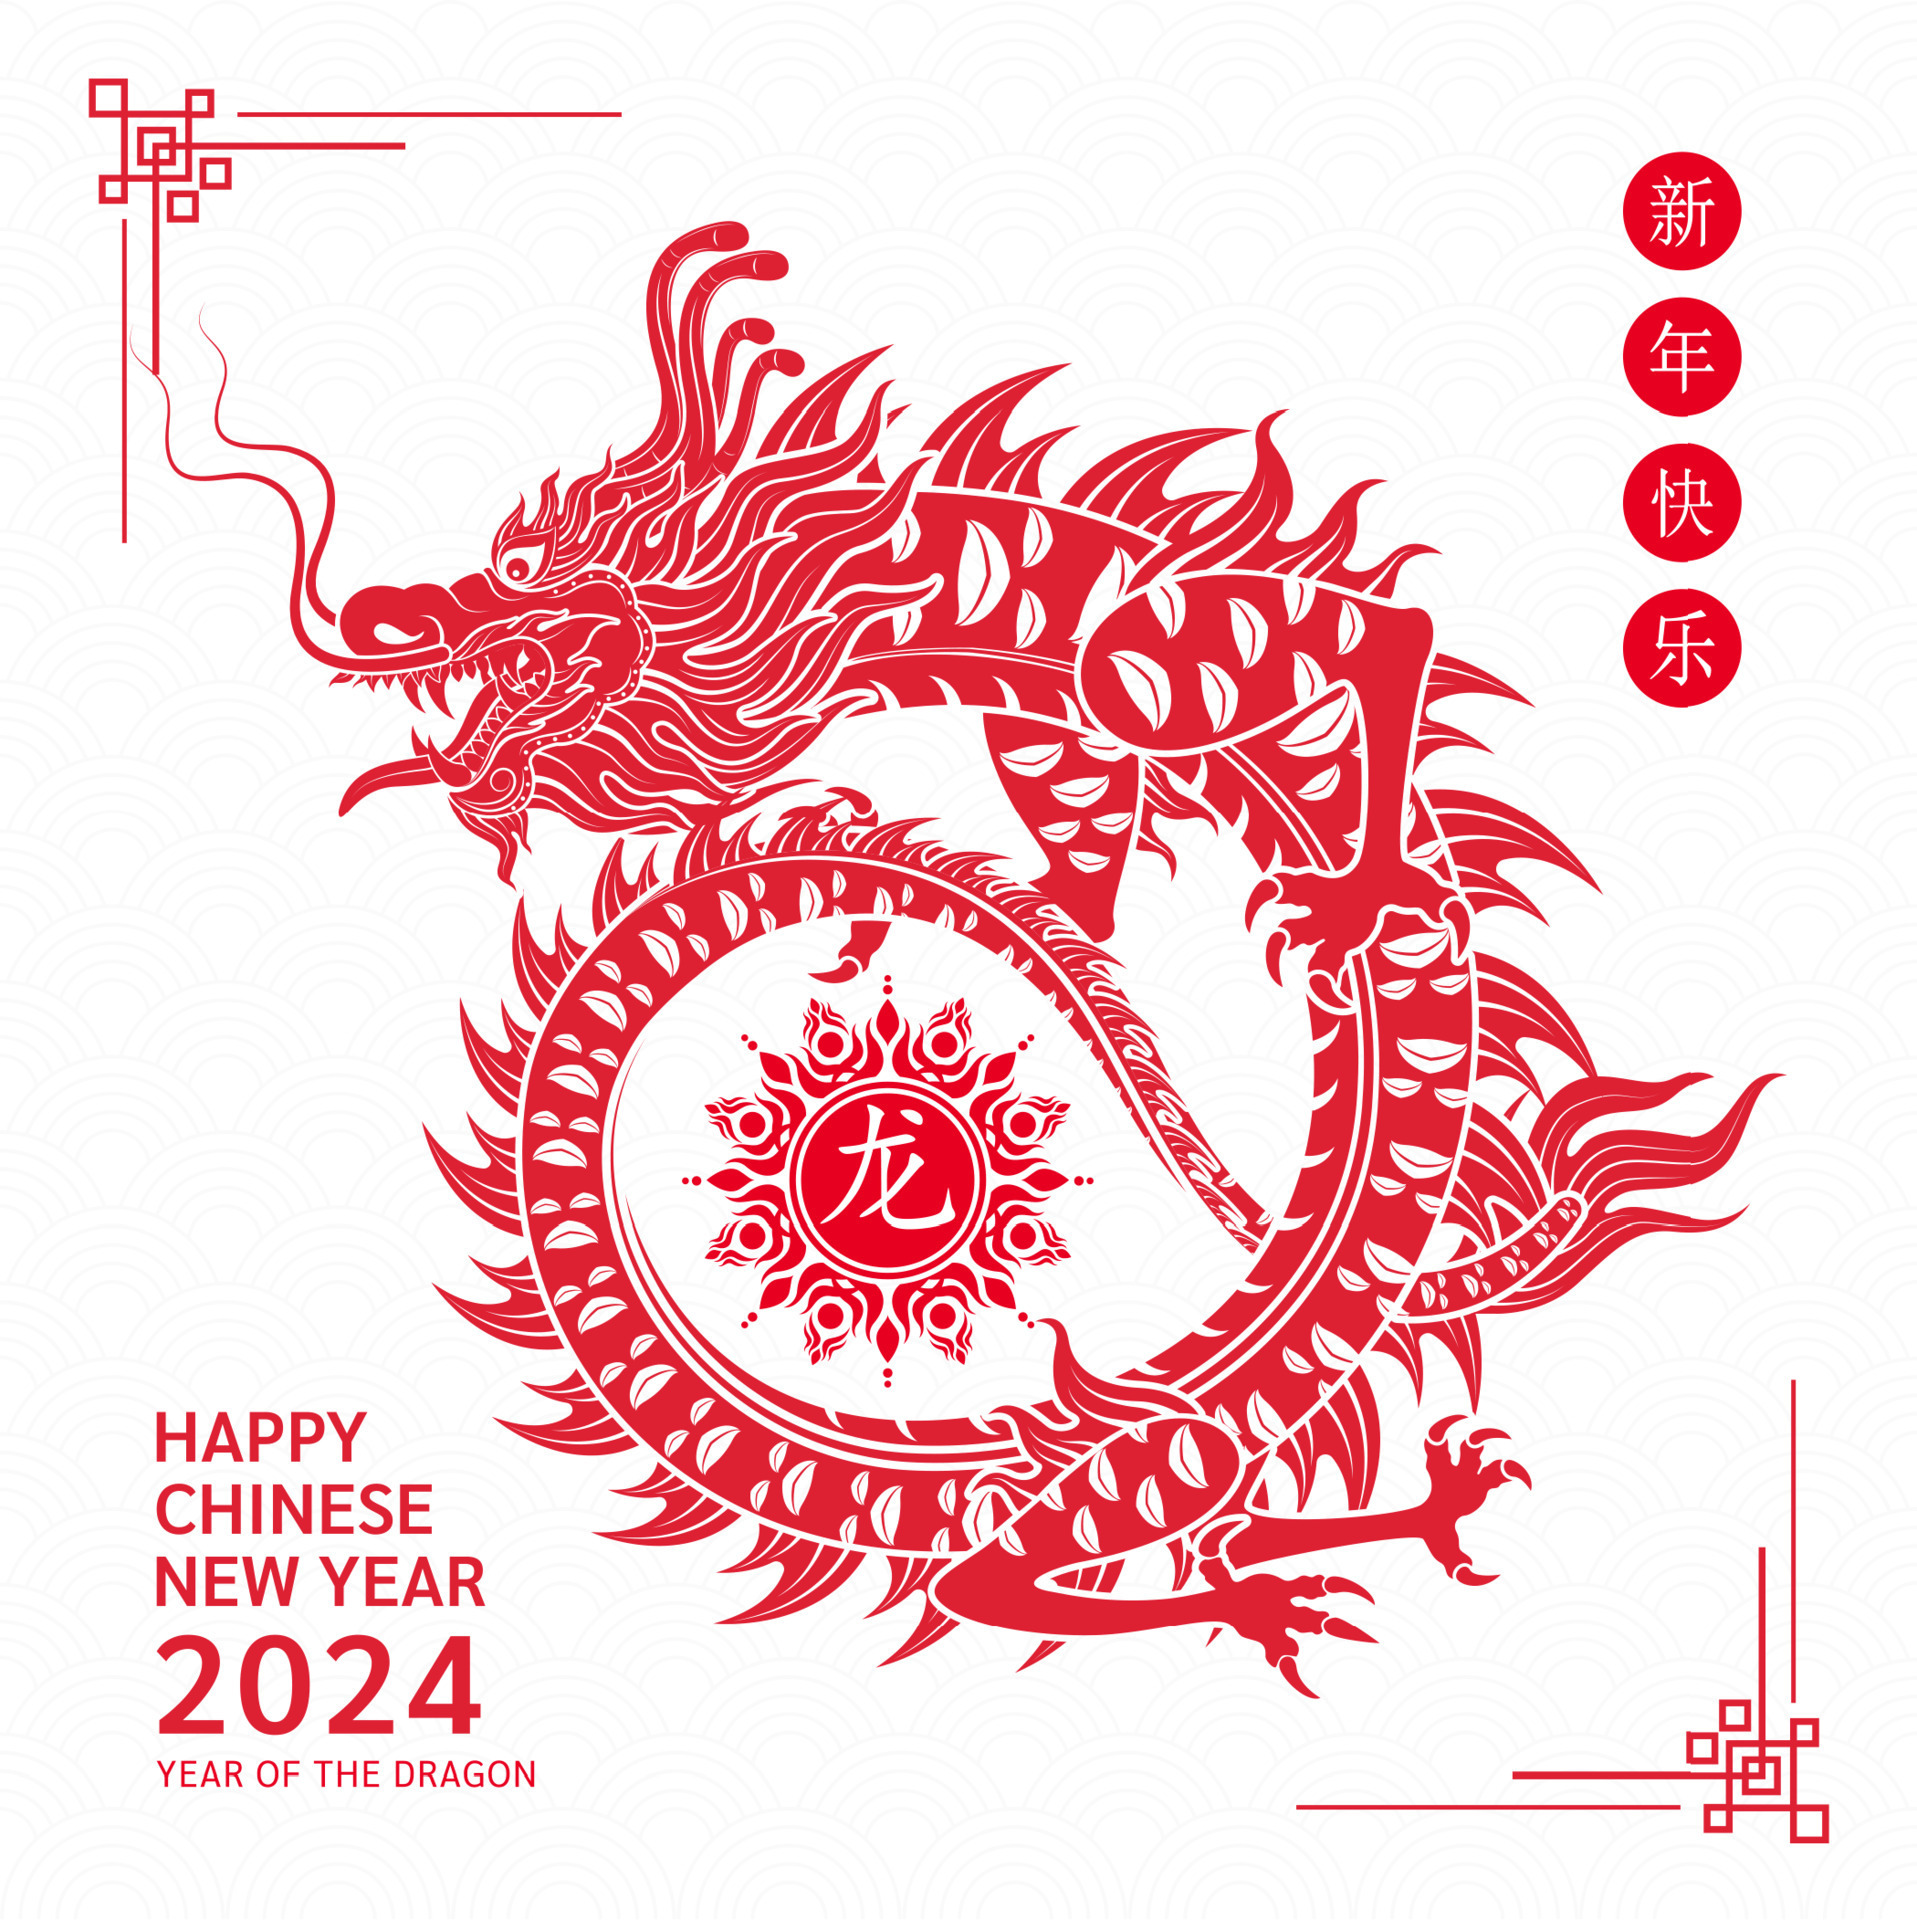 Happy Chinese New Year 2024. Chinese dragon red zodiac sign on white